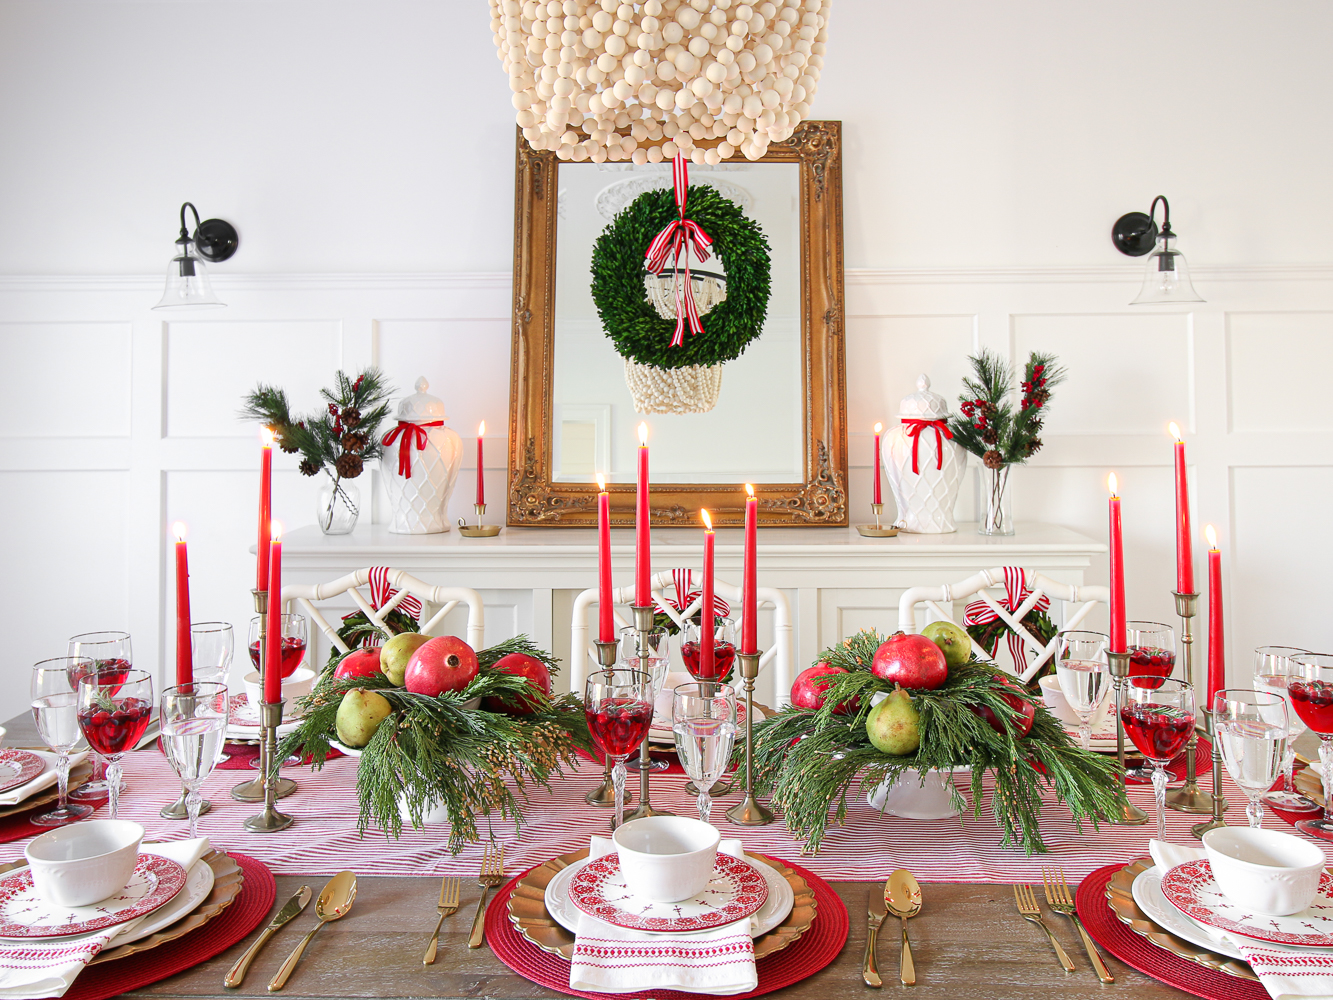 Christmas tablescape, antique mirror, wood bead chandelier, red ribbon, boxwood wreath, red candles, gold flatware, red and white table decor, Christmas greenery